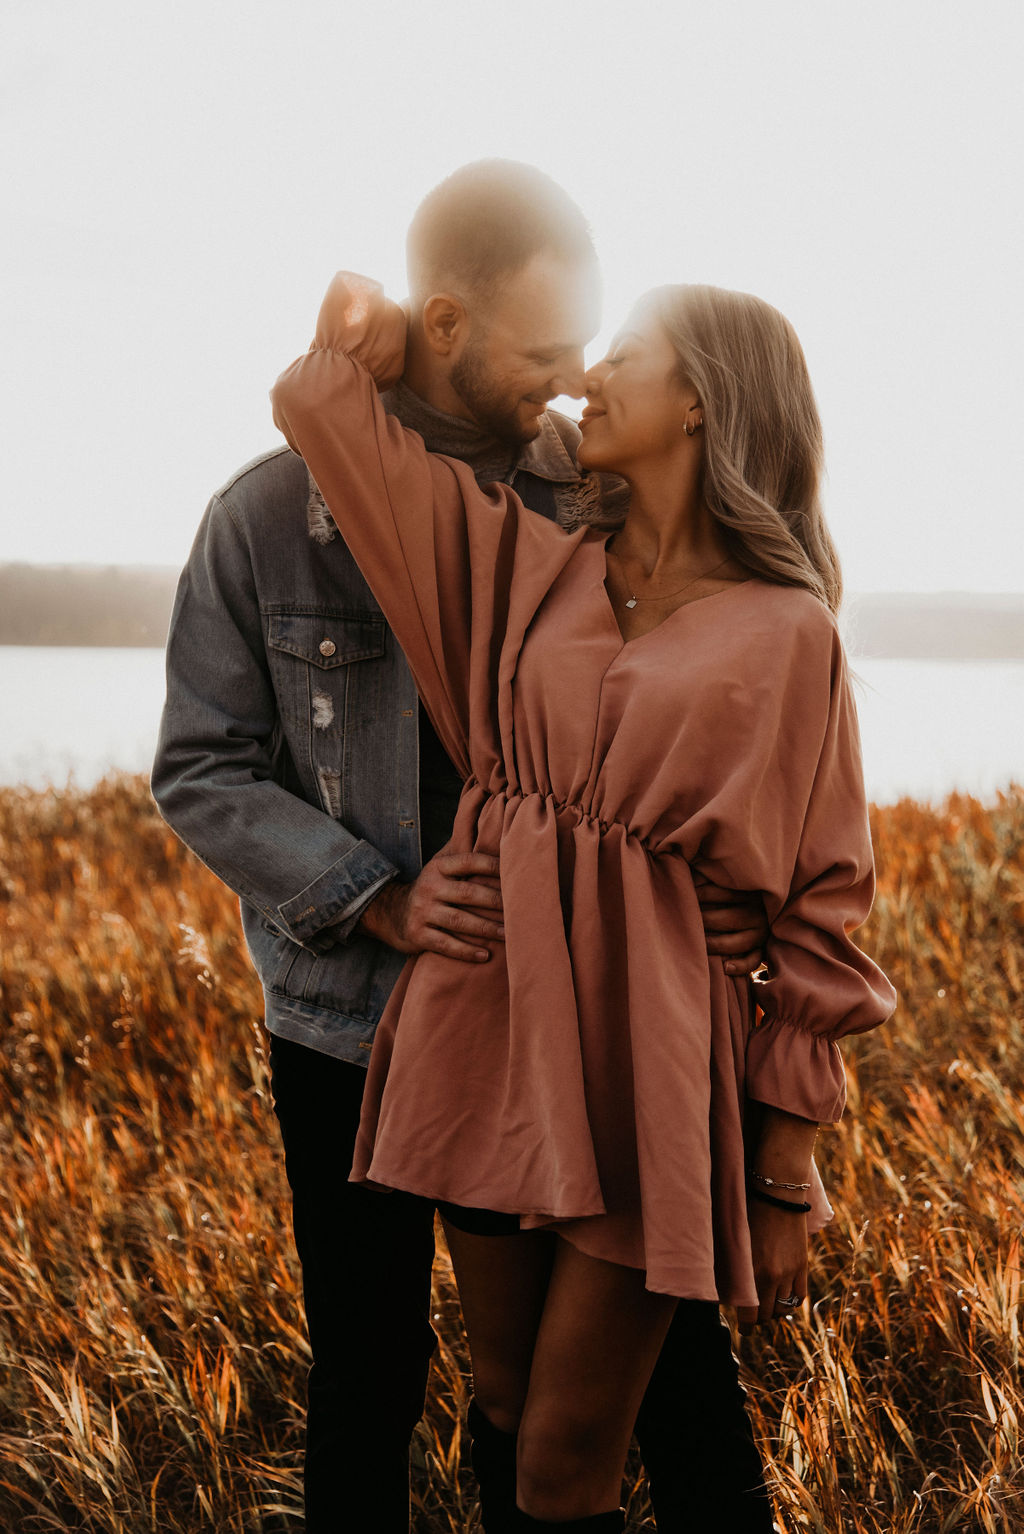 Blush dress and denim jacket perfect for engagement session outfit inspiration